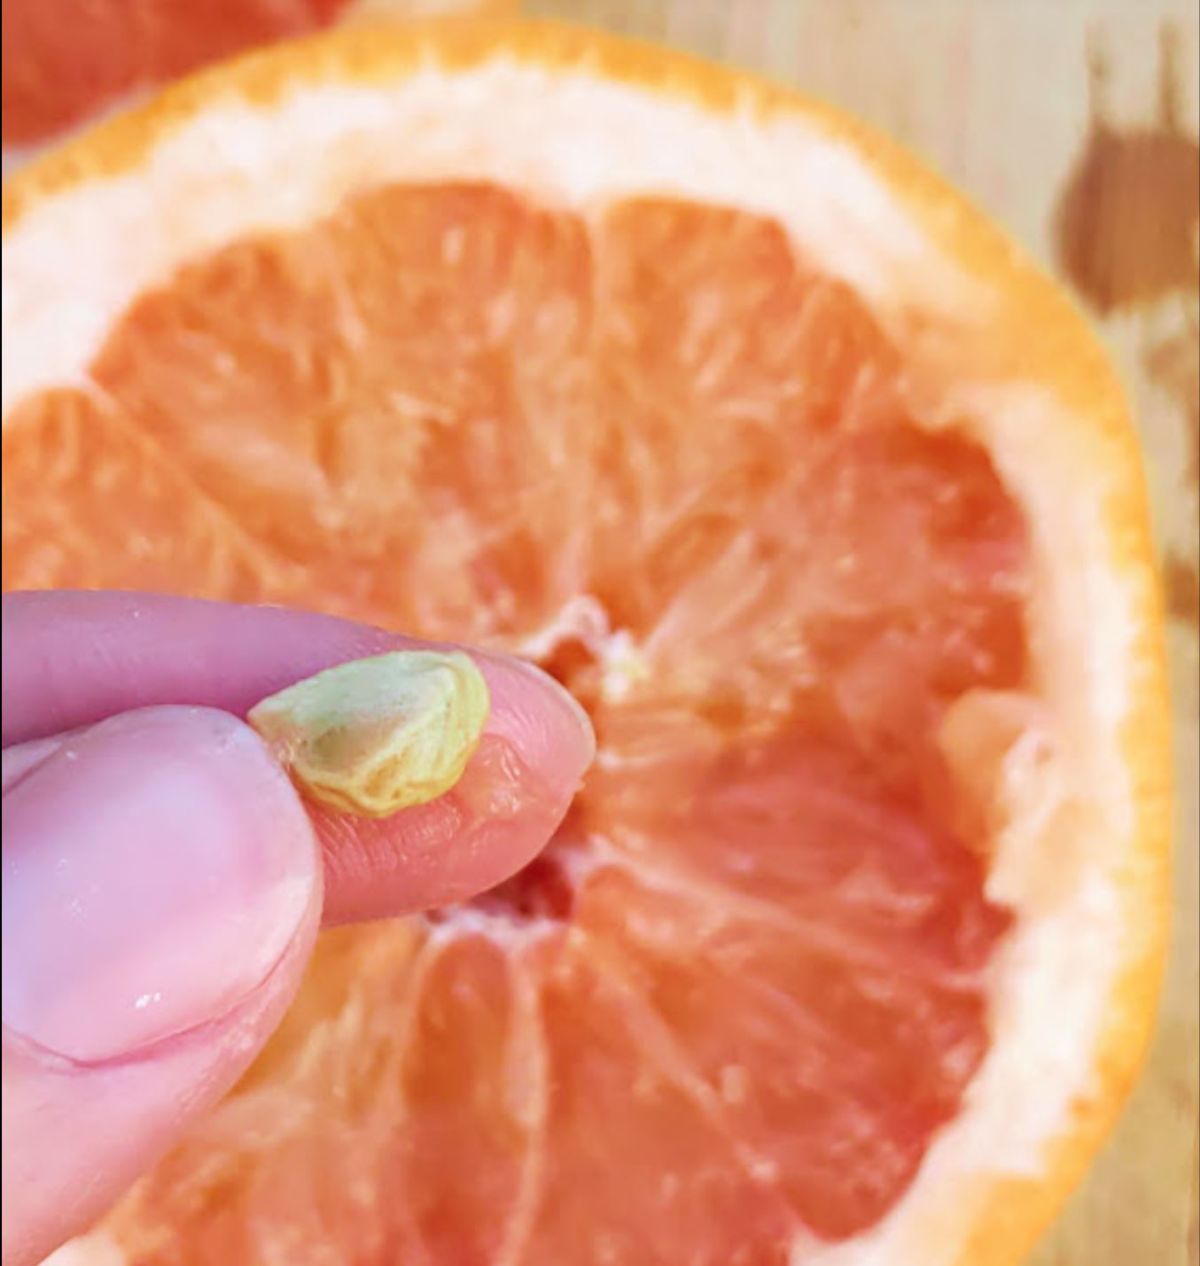 Hand holding a grapefruit seed above a sliced grapefruit